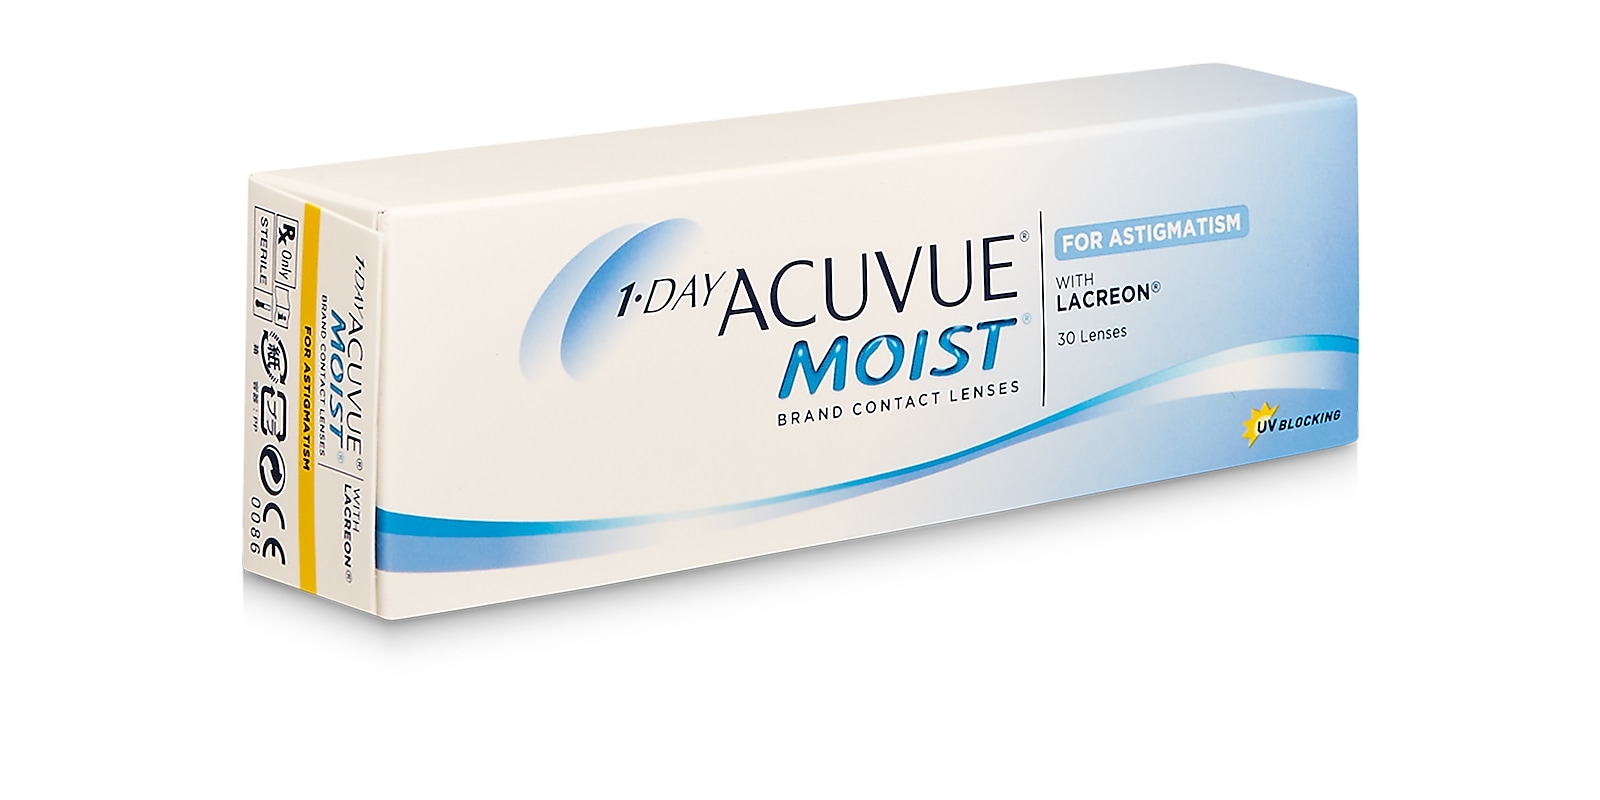 1-Day Acuvue® Moist for Astigmatism, 30 pack contact lenses